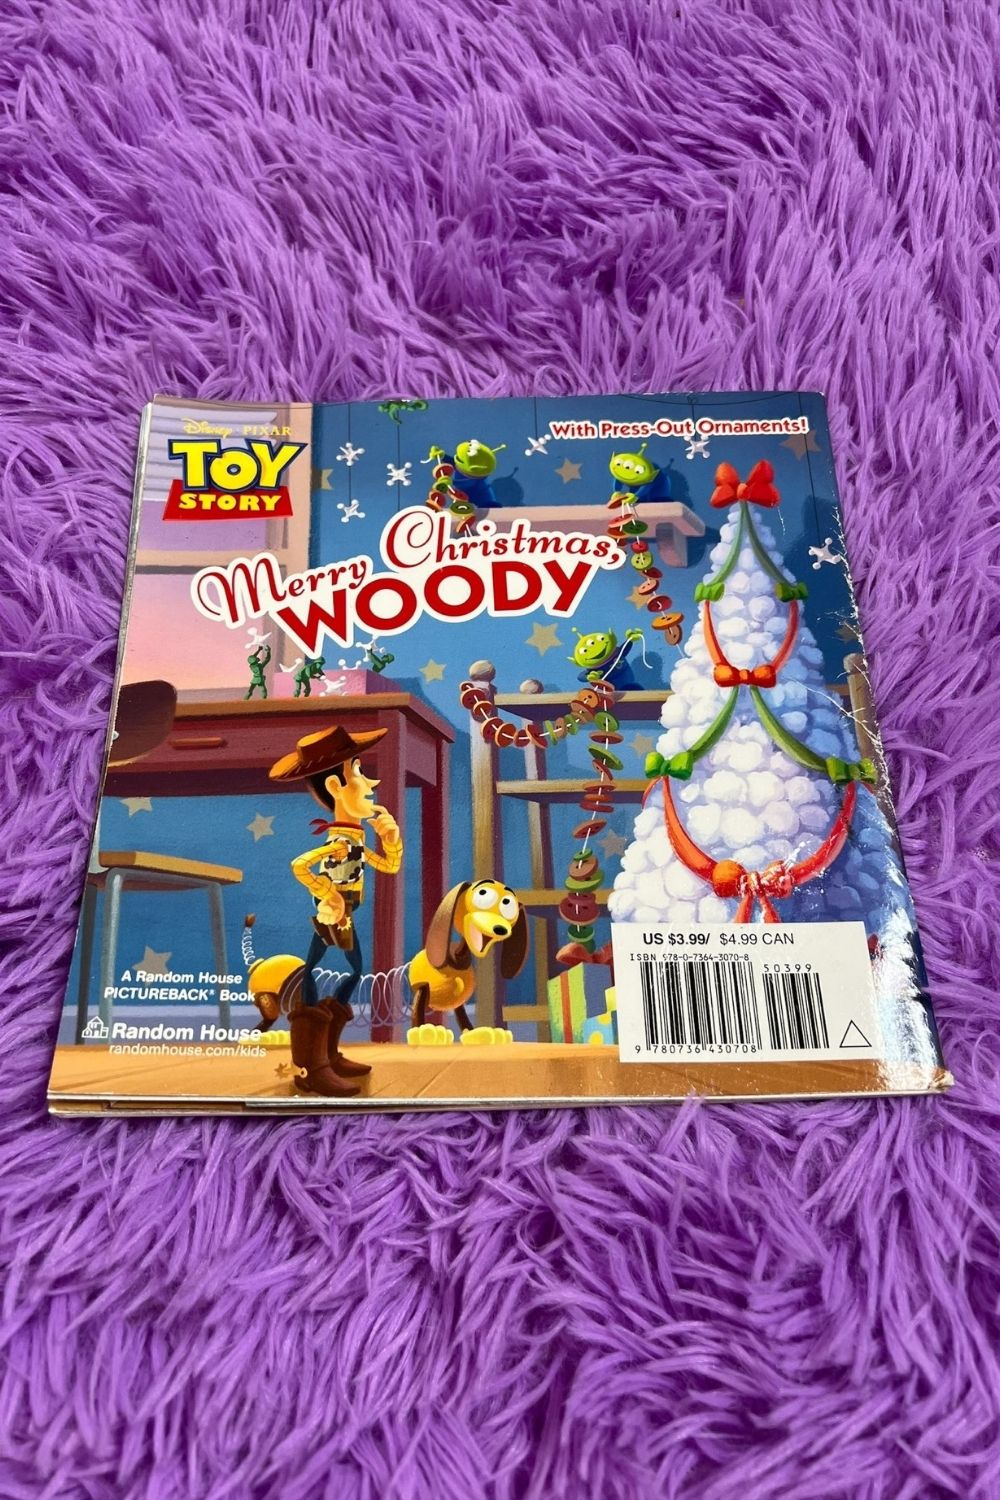 MERRY CHRISTMAS WOODY ORNAMENT BOOK*